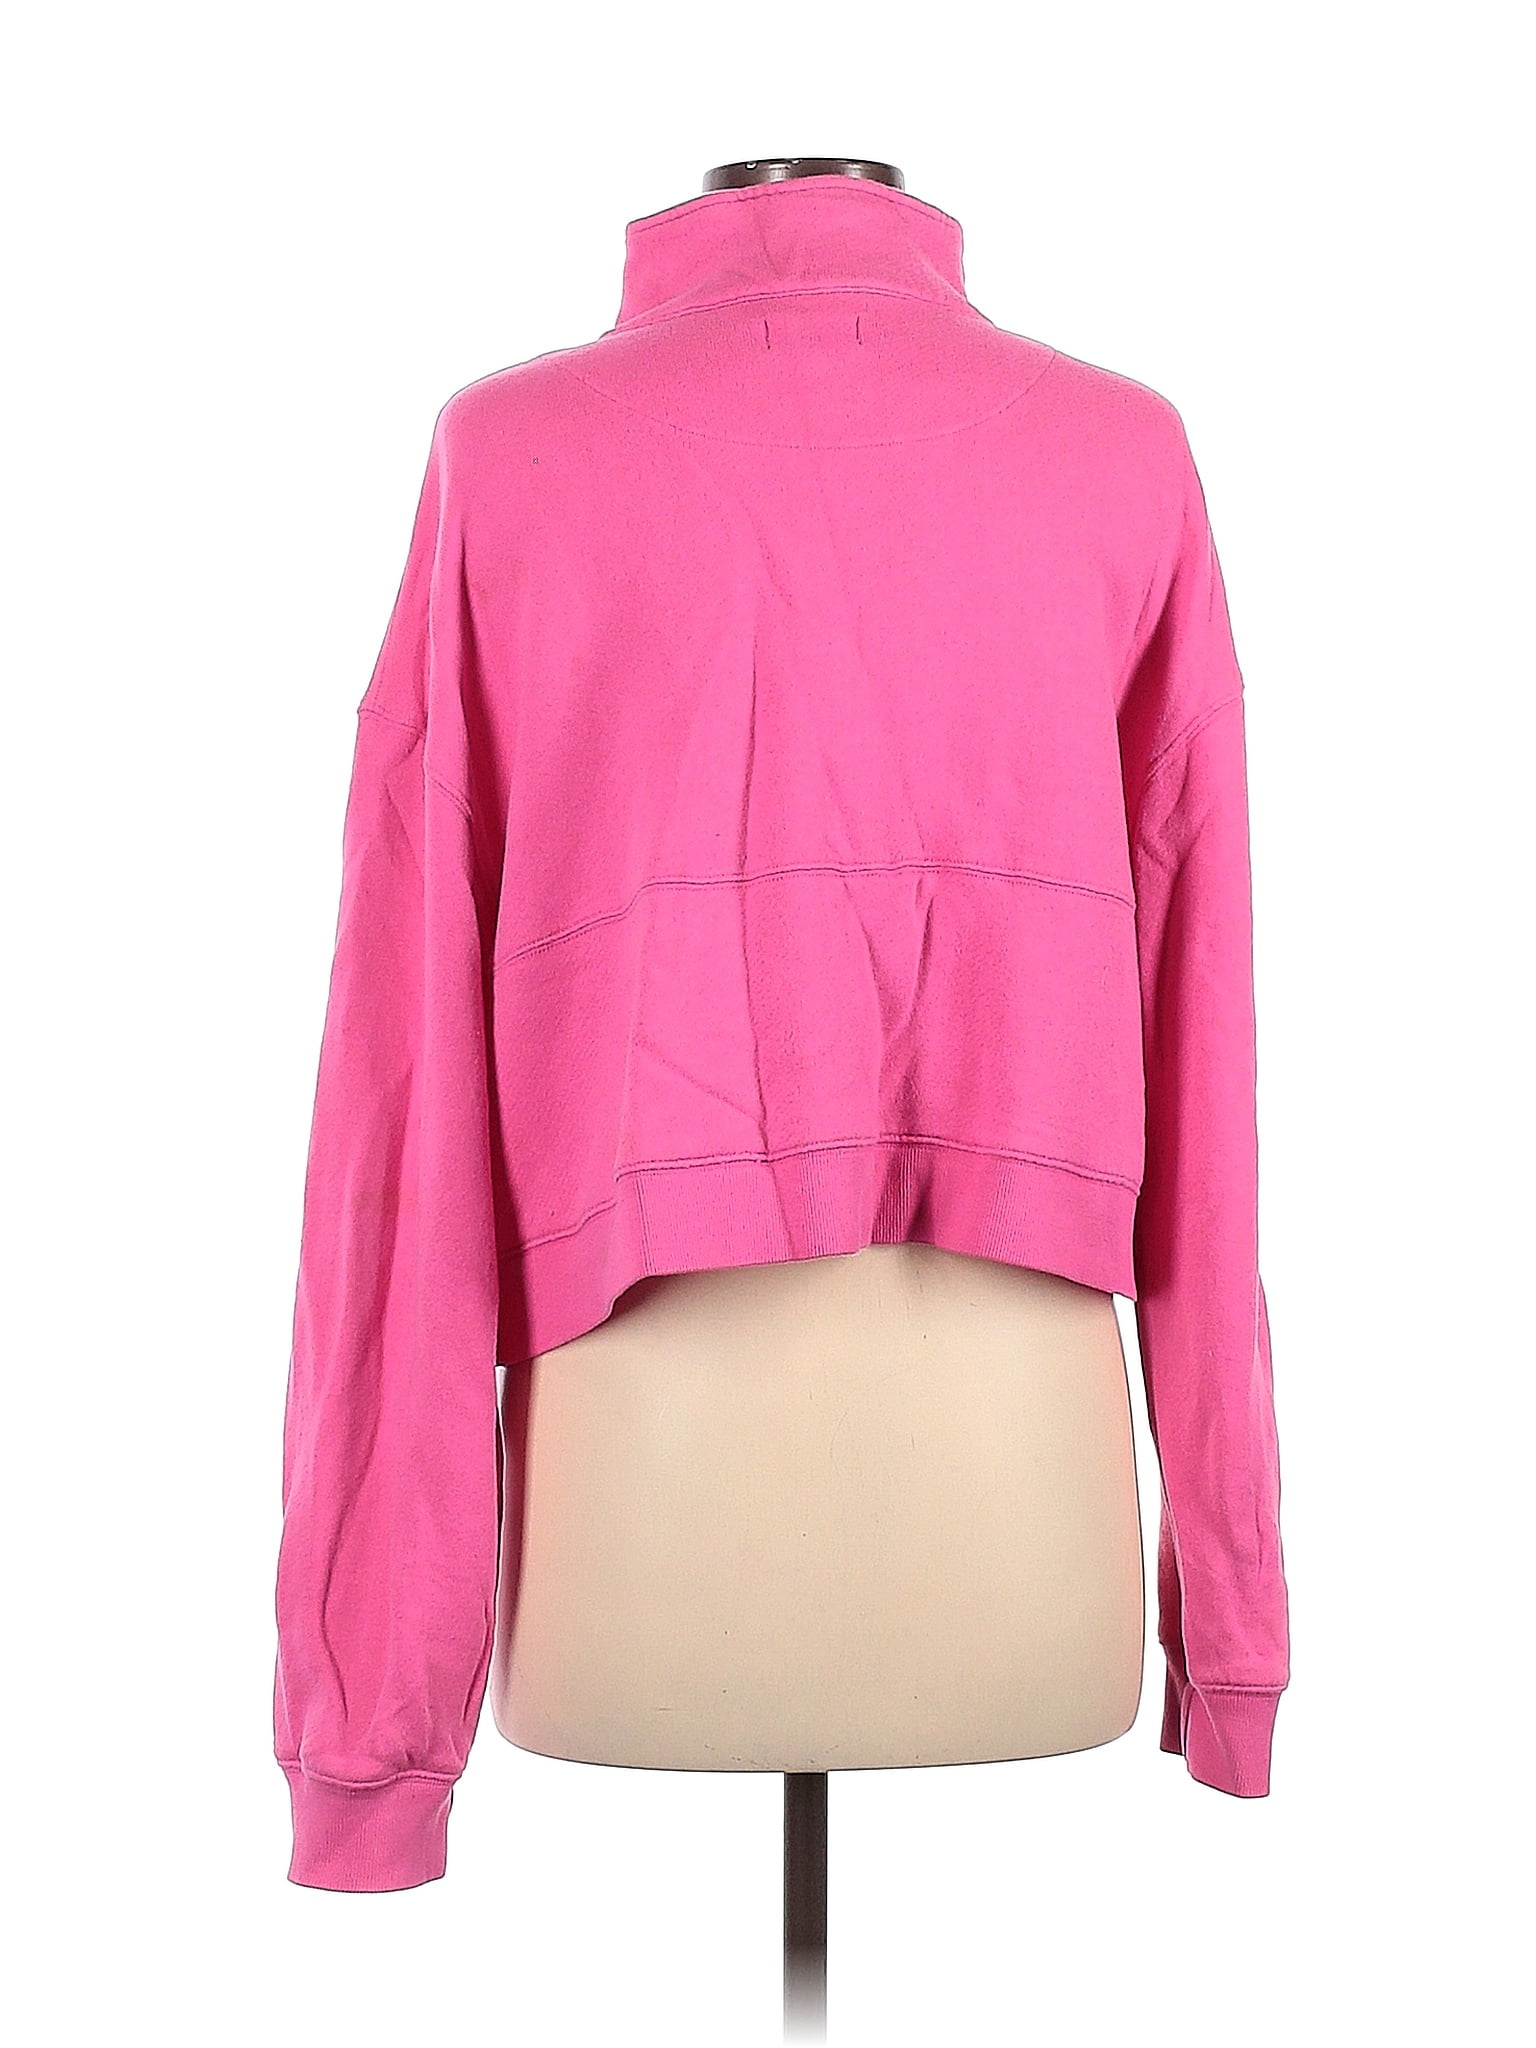 Sincerely Jules for Bandier 100% Cotton Pink Track Jacket Size M - 81% off